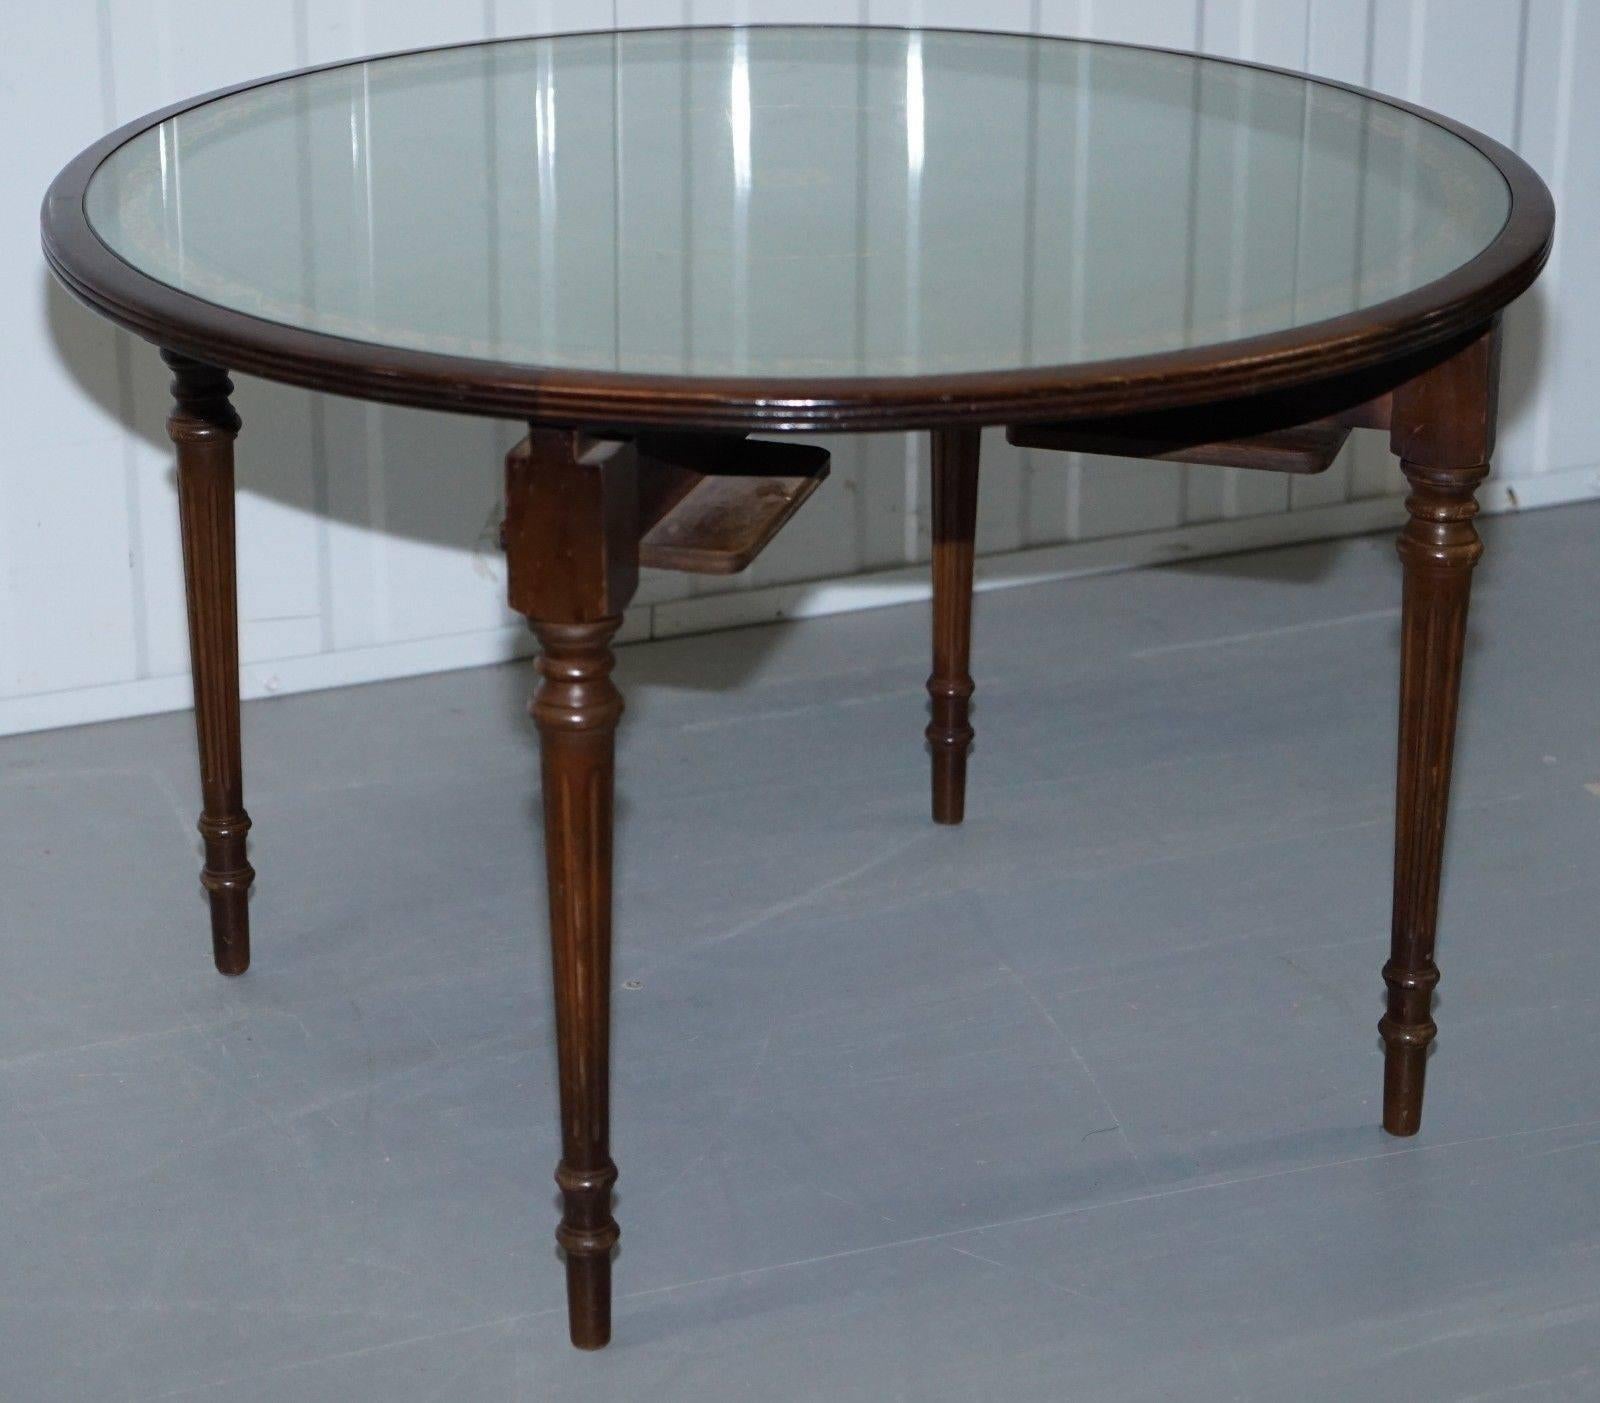 Lovely Regency Style Drum Coffee Table with Nested Tables under Green Leather 7